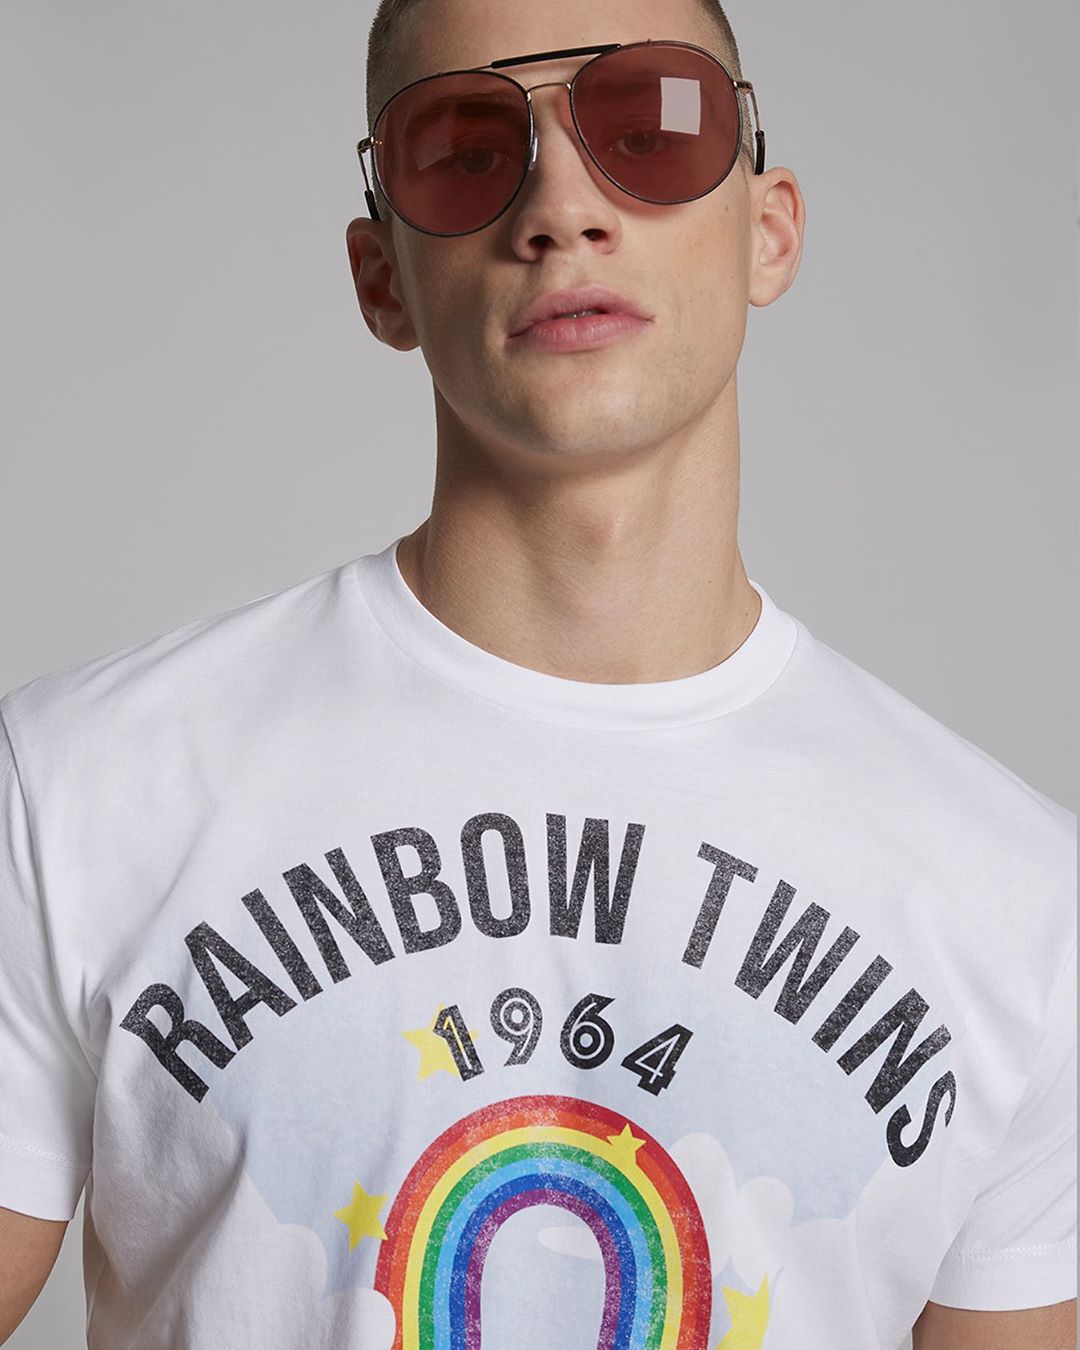 DSQUARED2  - Dean & Dan Caten - #D2Pride: #Dsquared2 #Pride2020 Rainbow collection 🌈 – Now Available at Dsquared2.com